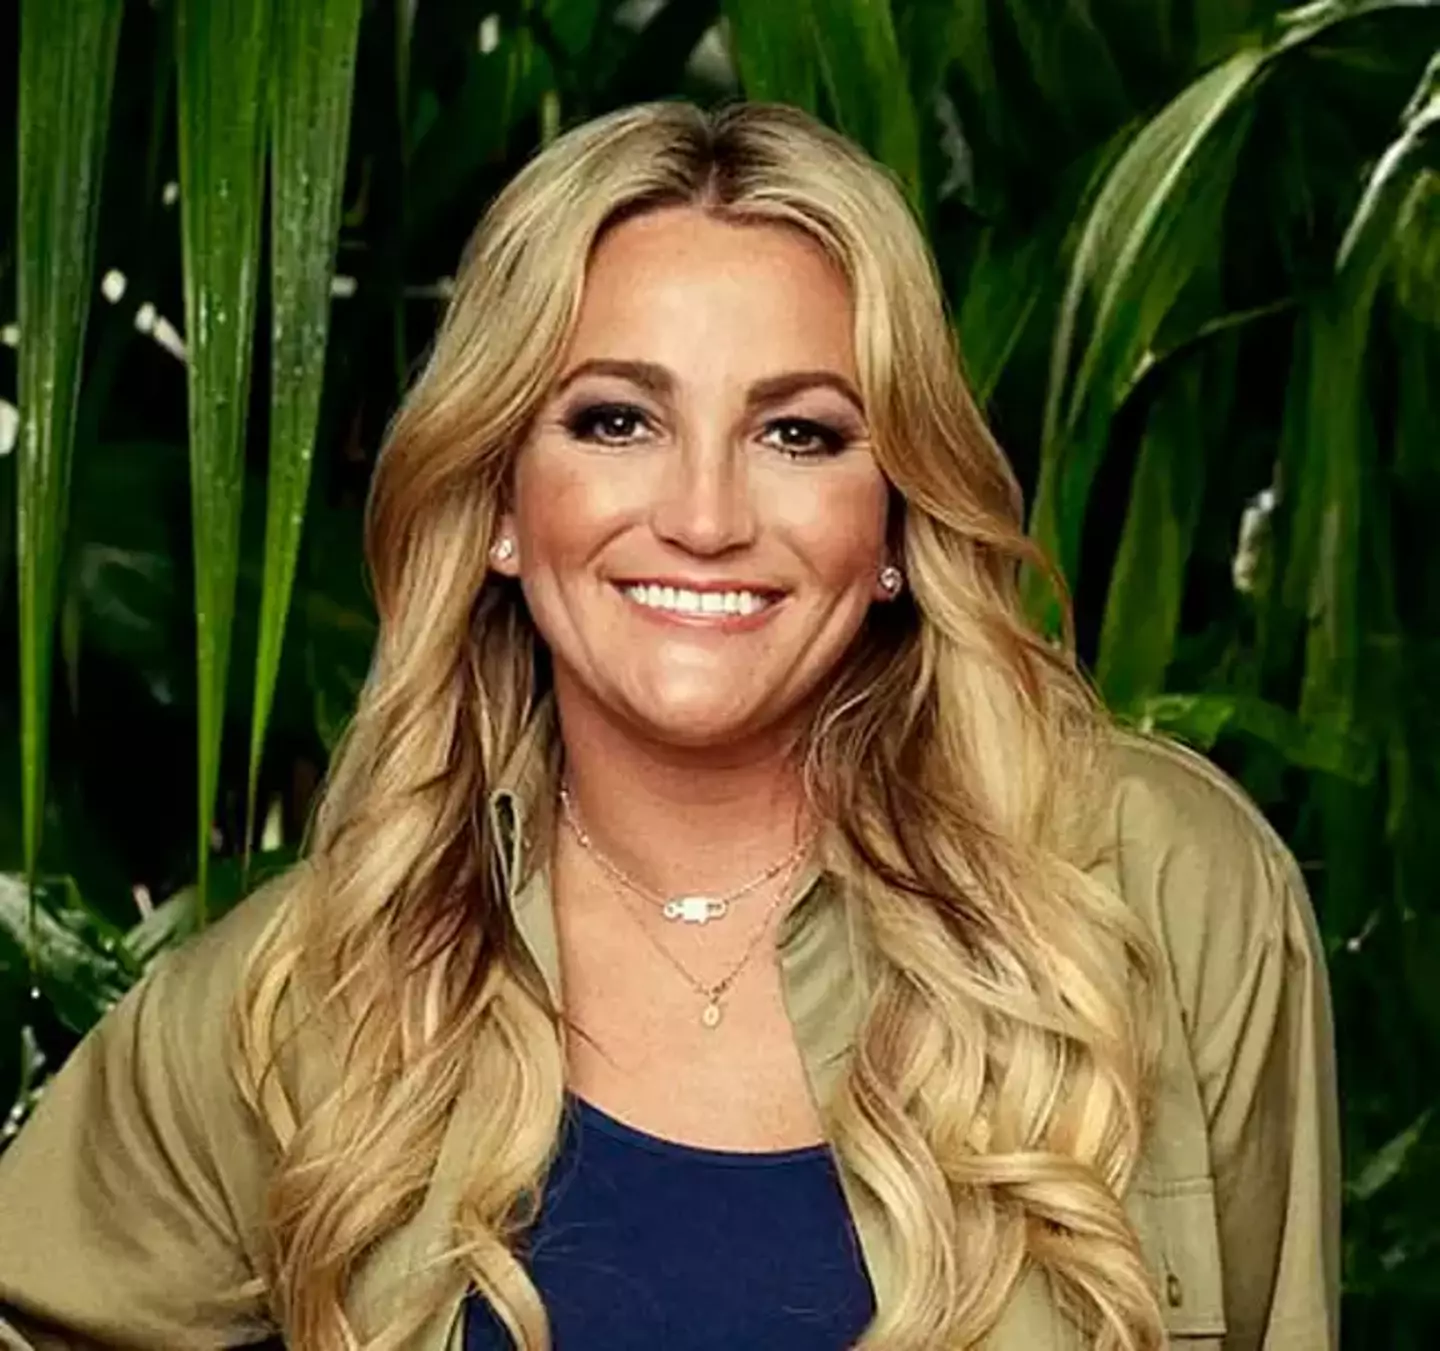 Jamie Lynn-Spears finally opens up about sister Britney after I'm A Celeb viewers thought she 'wasn't allowed to talk about it'.